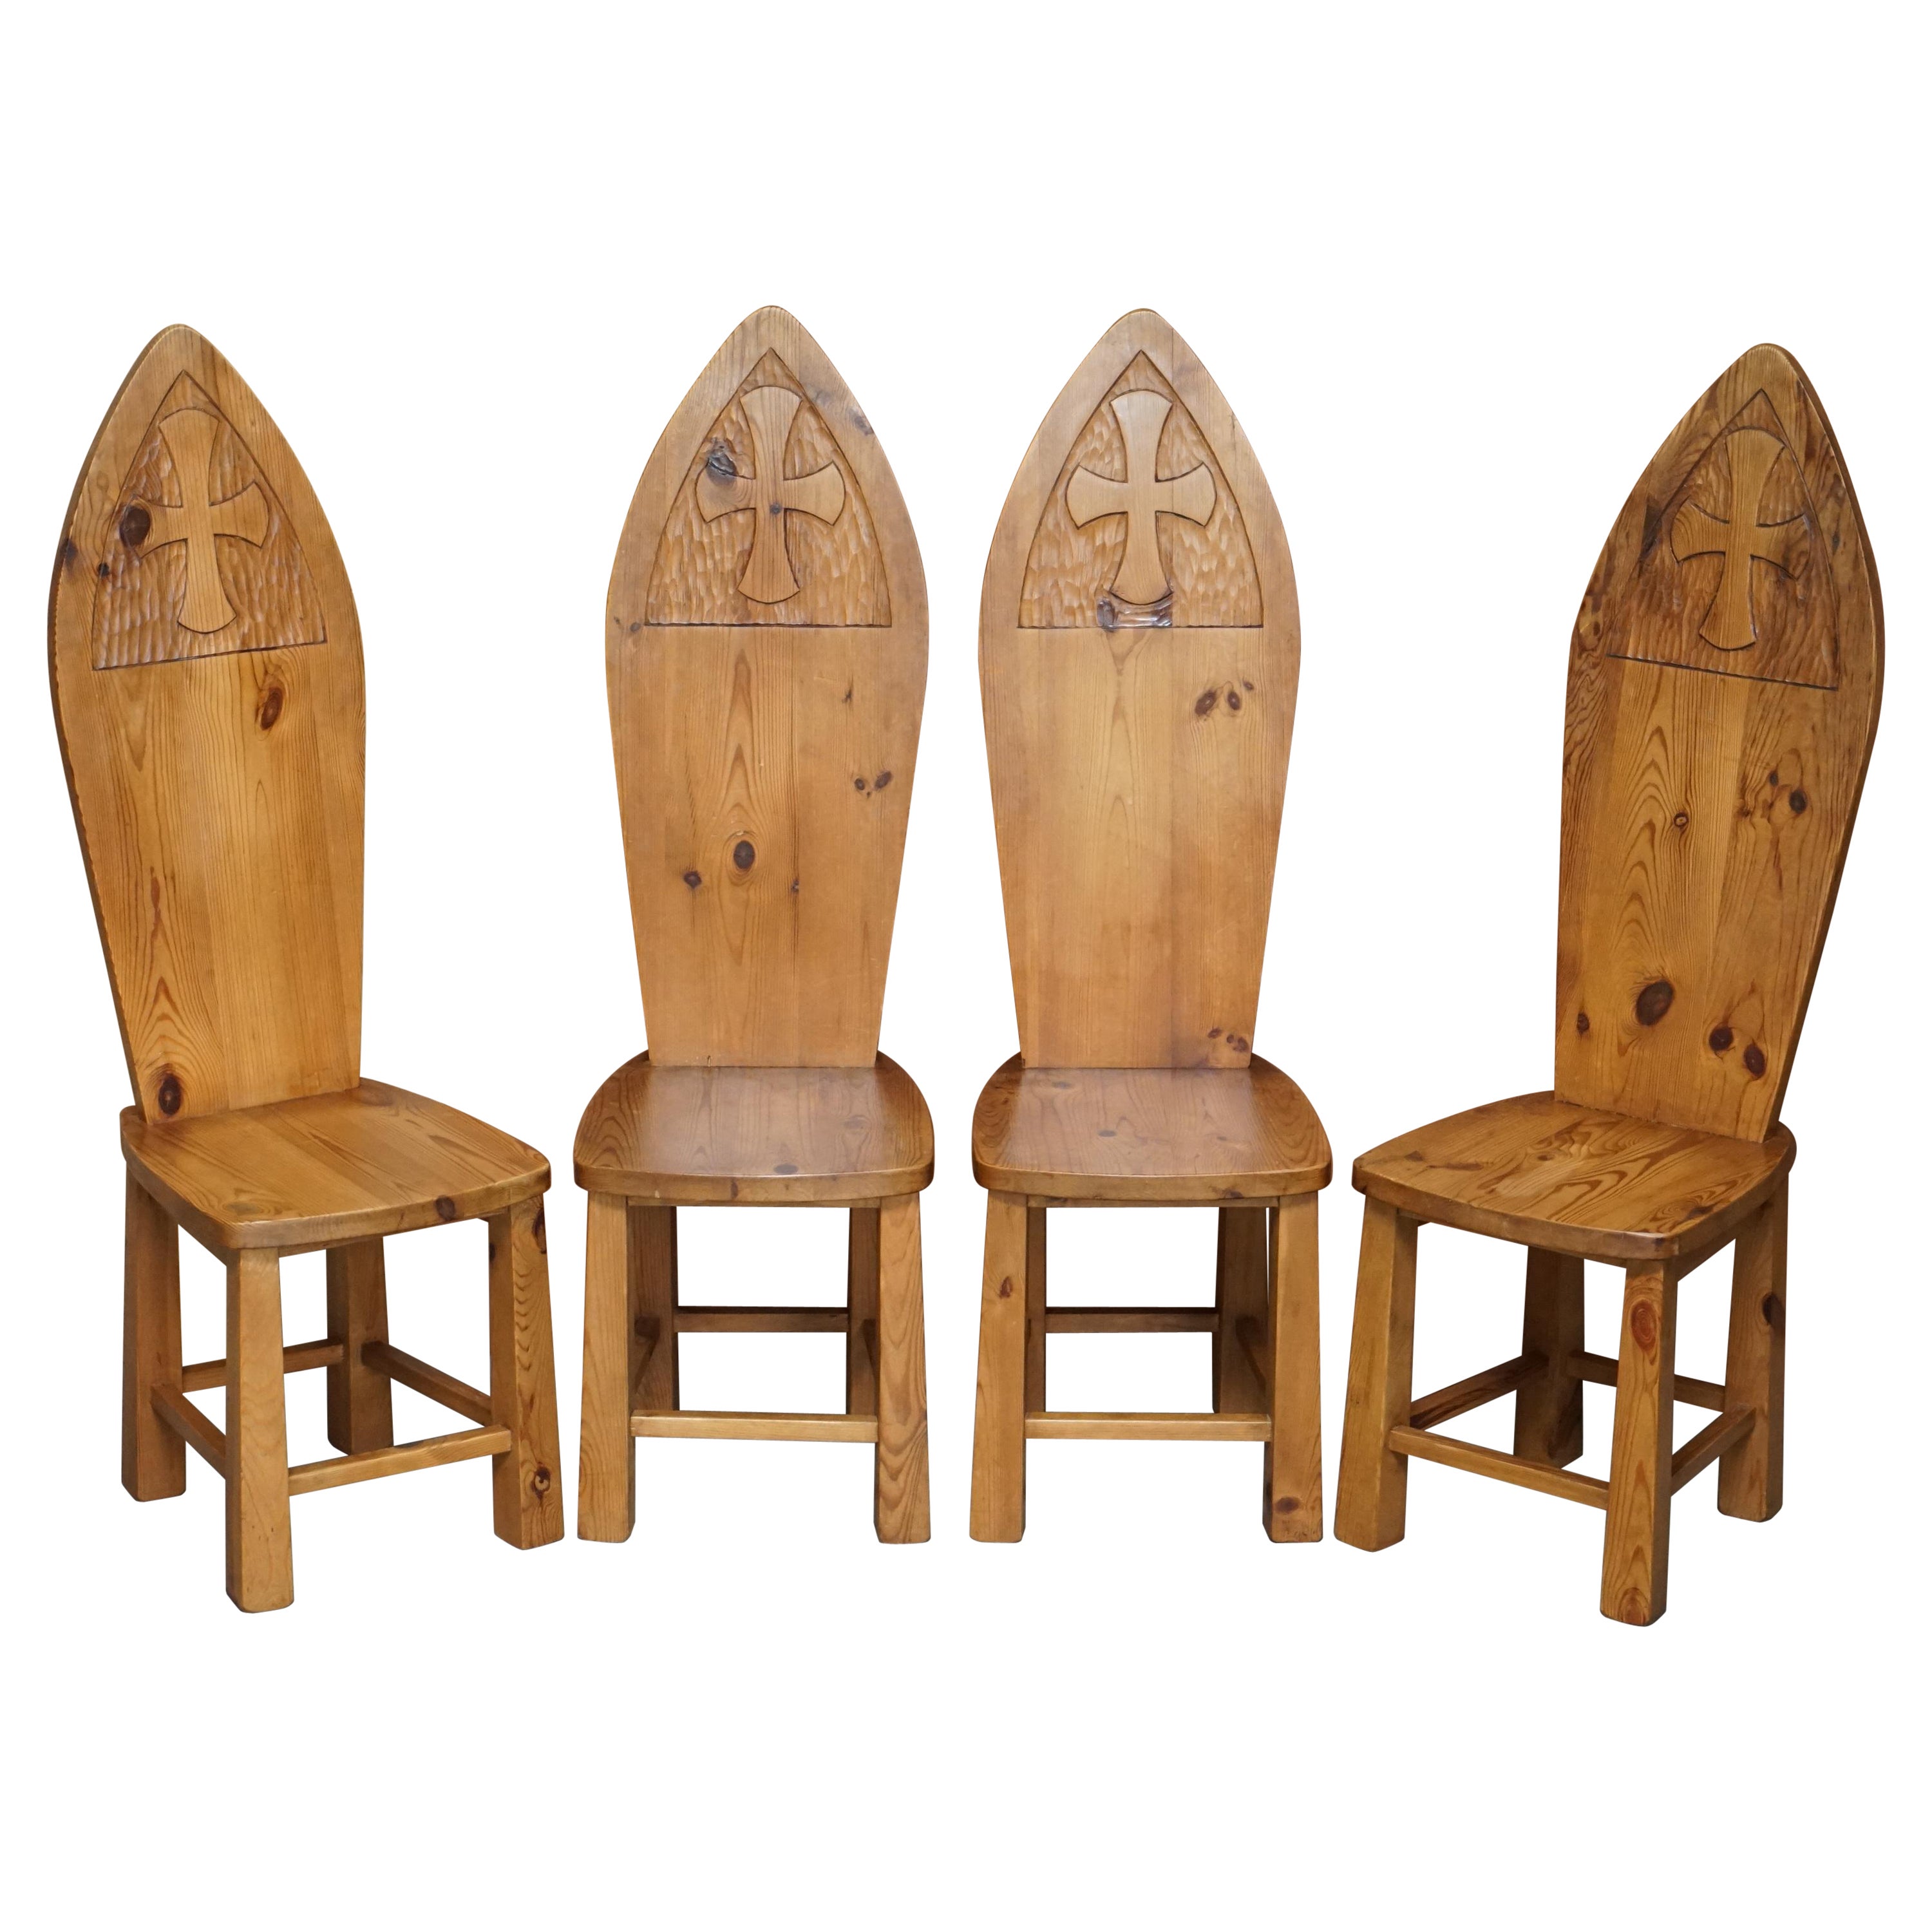 Set of Four Gothic Celtic Style Large Pitch Pine Dining Chairs with High Backs